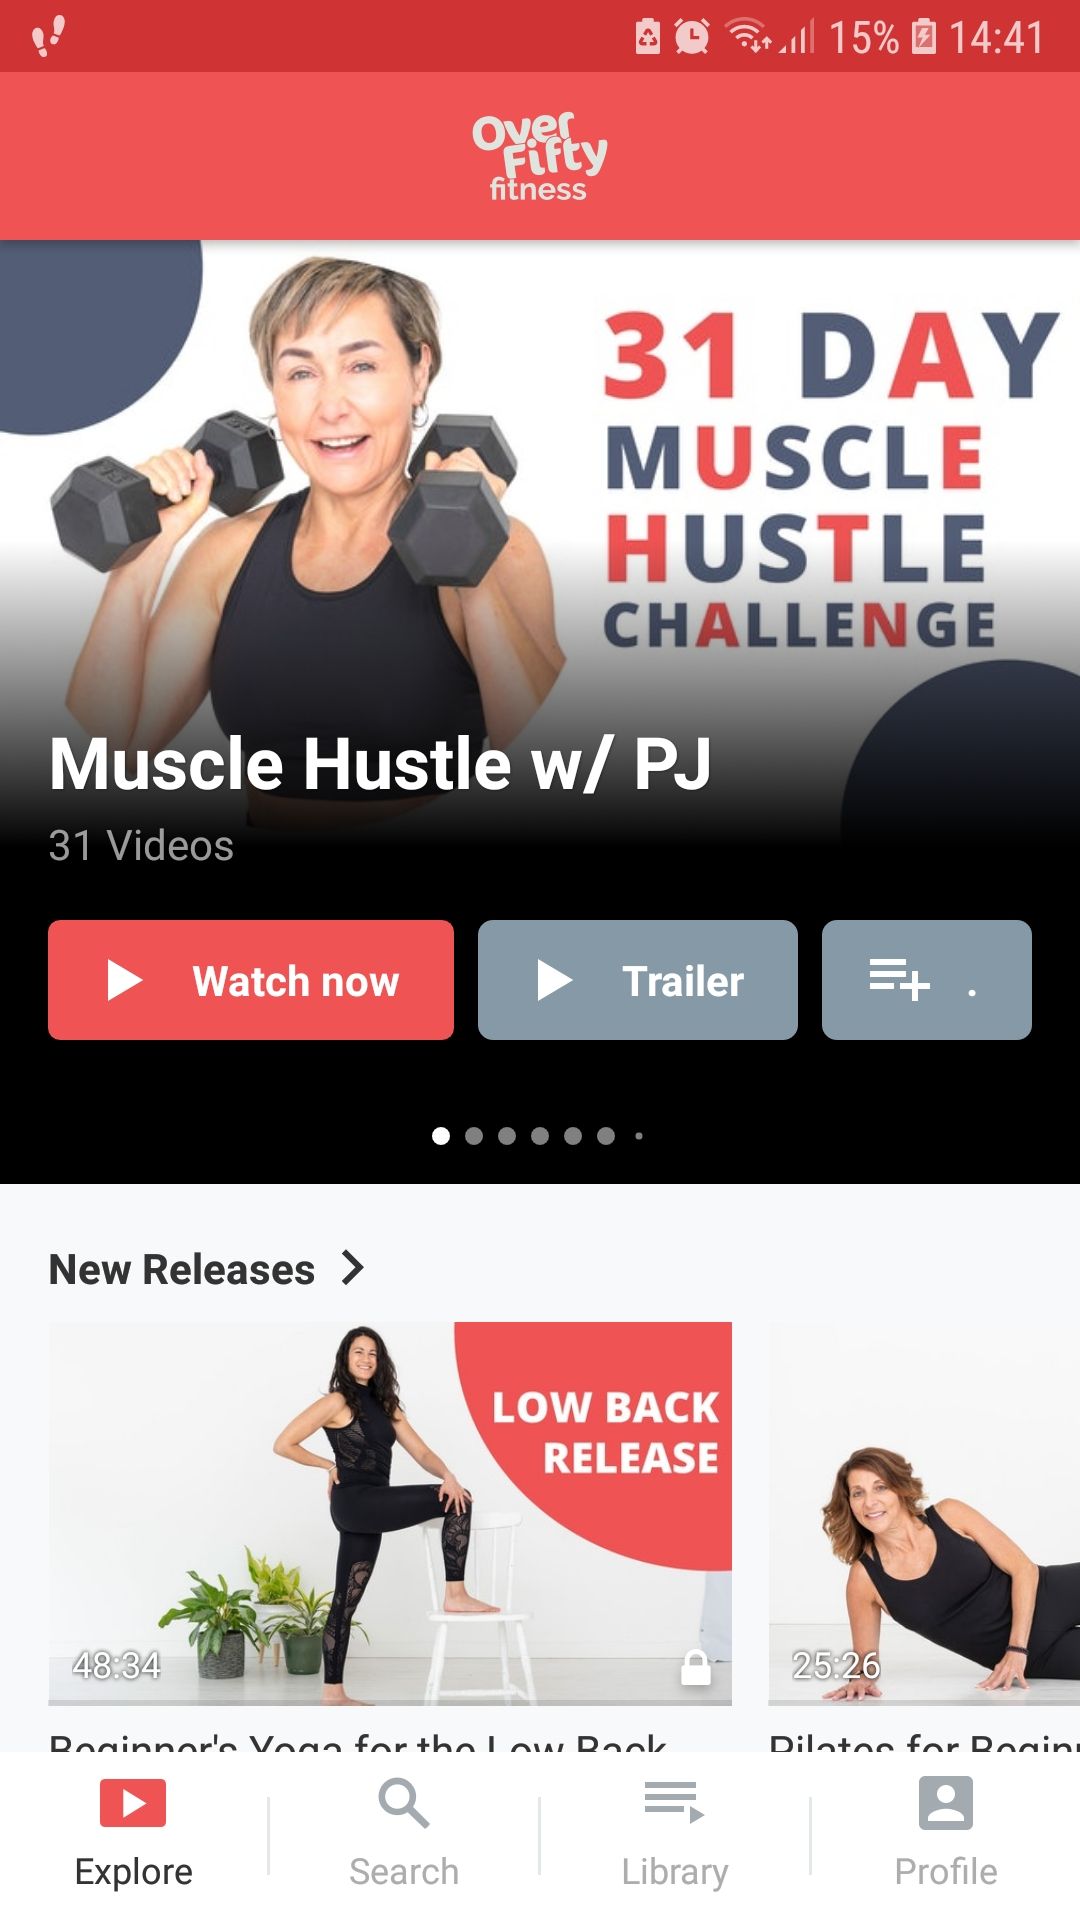 Over Fifty Fitness mobile exercise app new releases